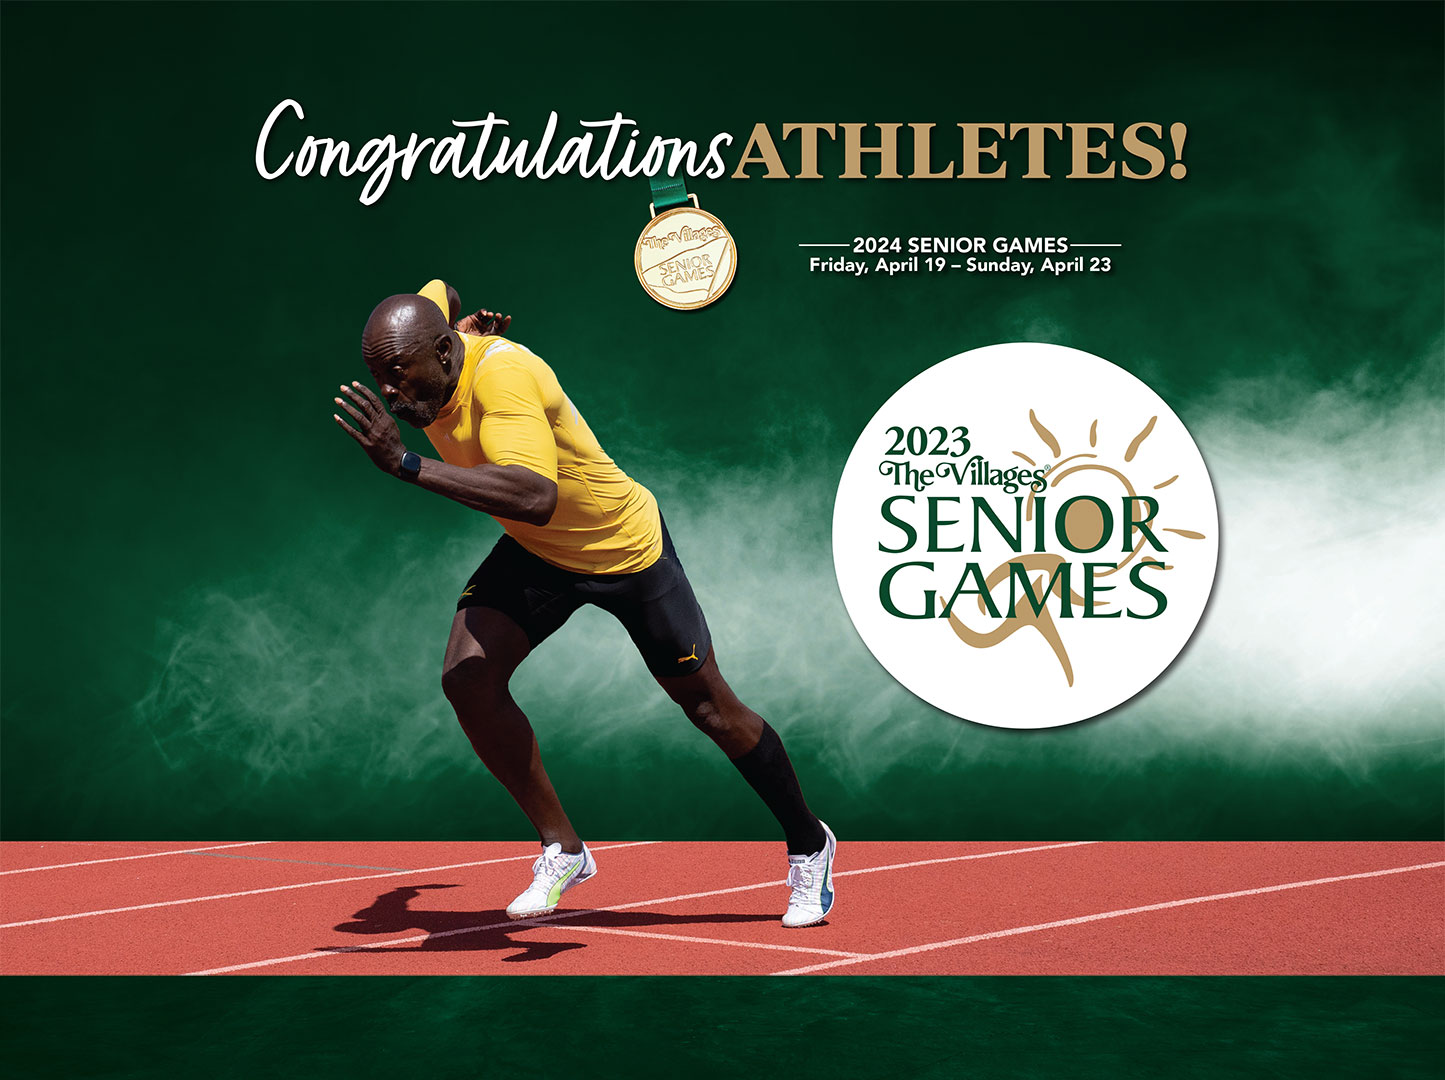 A congratulations message above an athlete on a track and The Villages senior games 2023 logo to the right